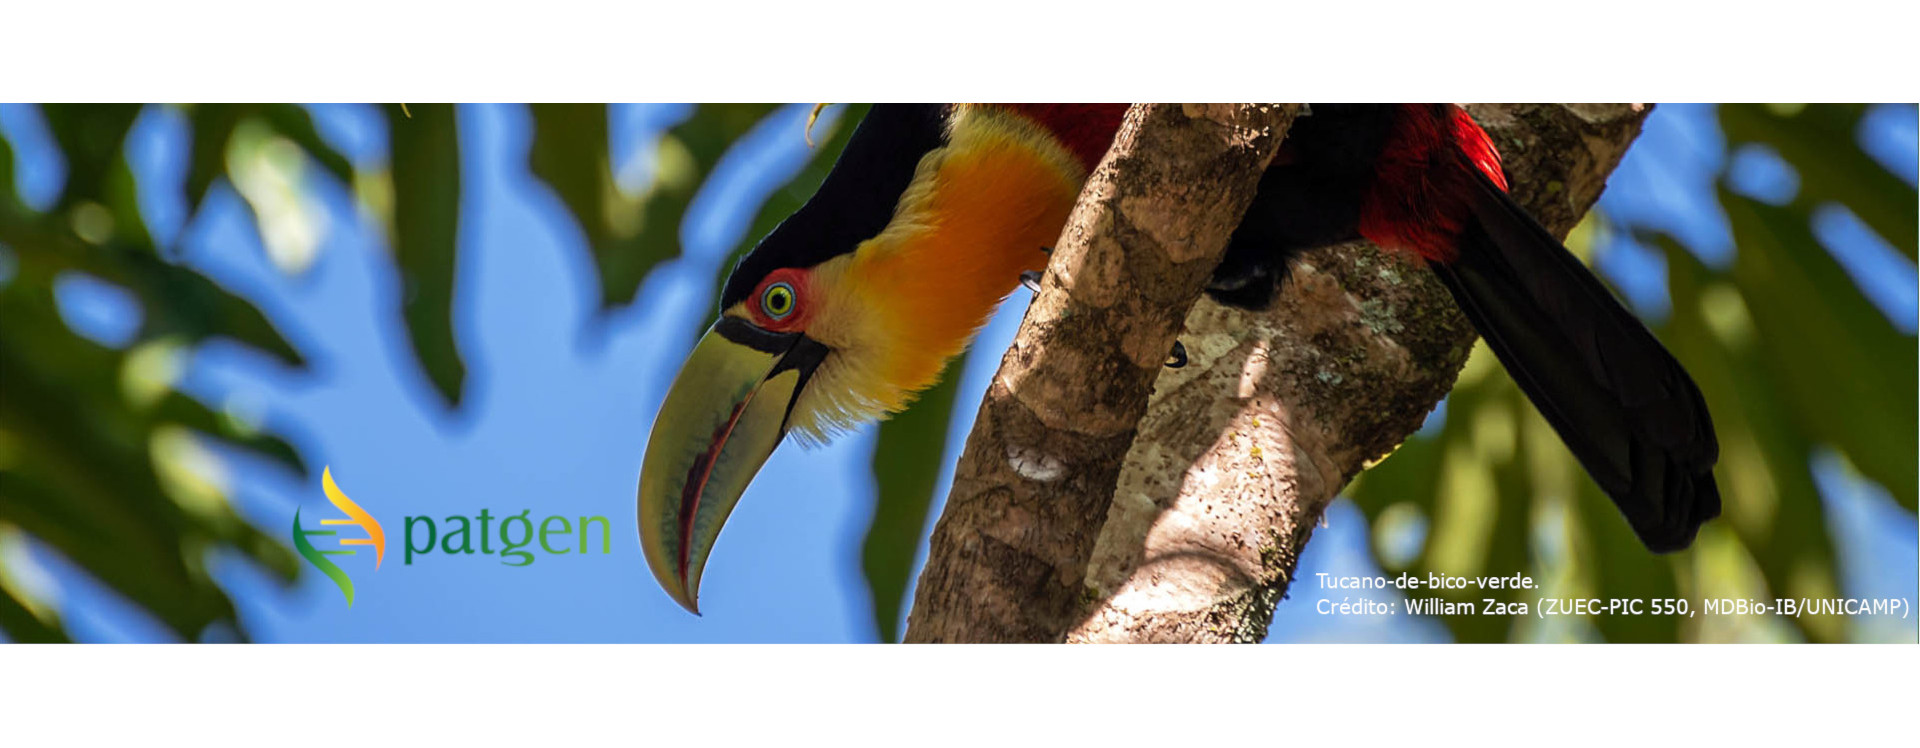 Image of a green-billed toucan perched on a branch looking down. The image has a watermark with the genetic heritage commission logo positioned a little to the right, but close to the bottom left corner.